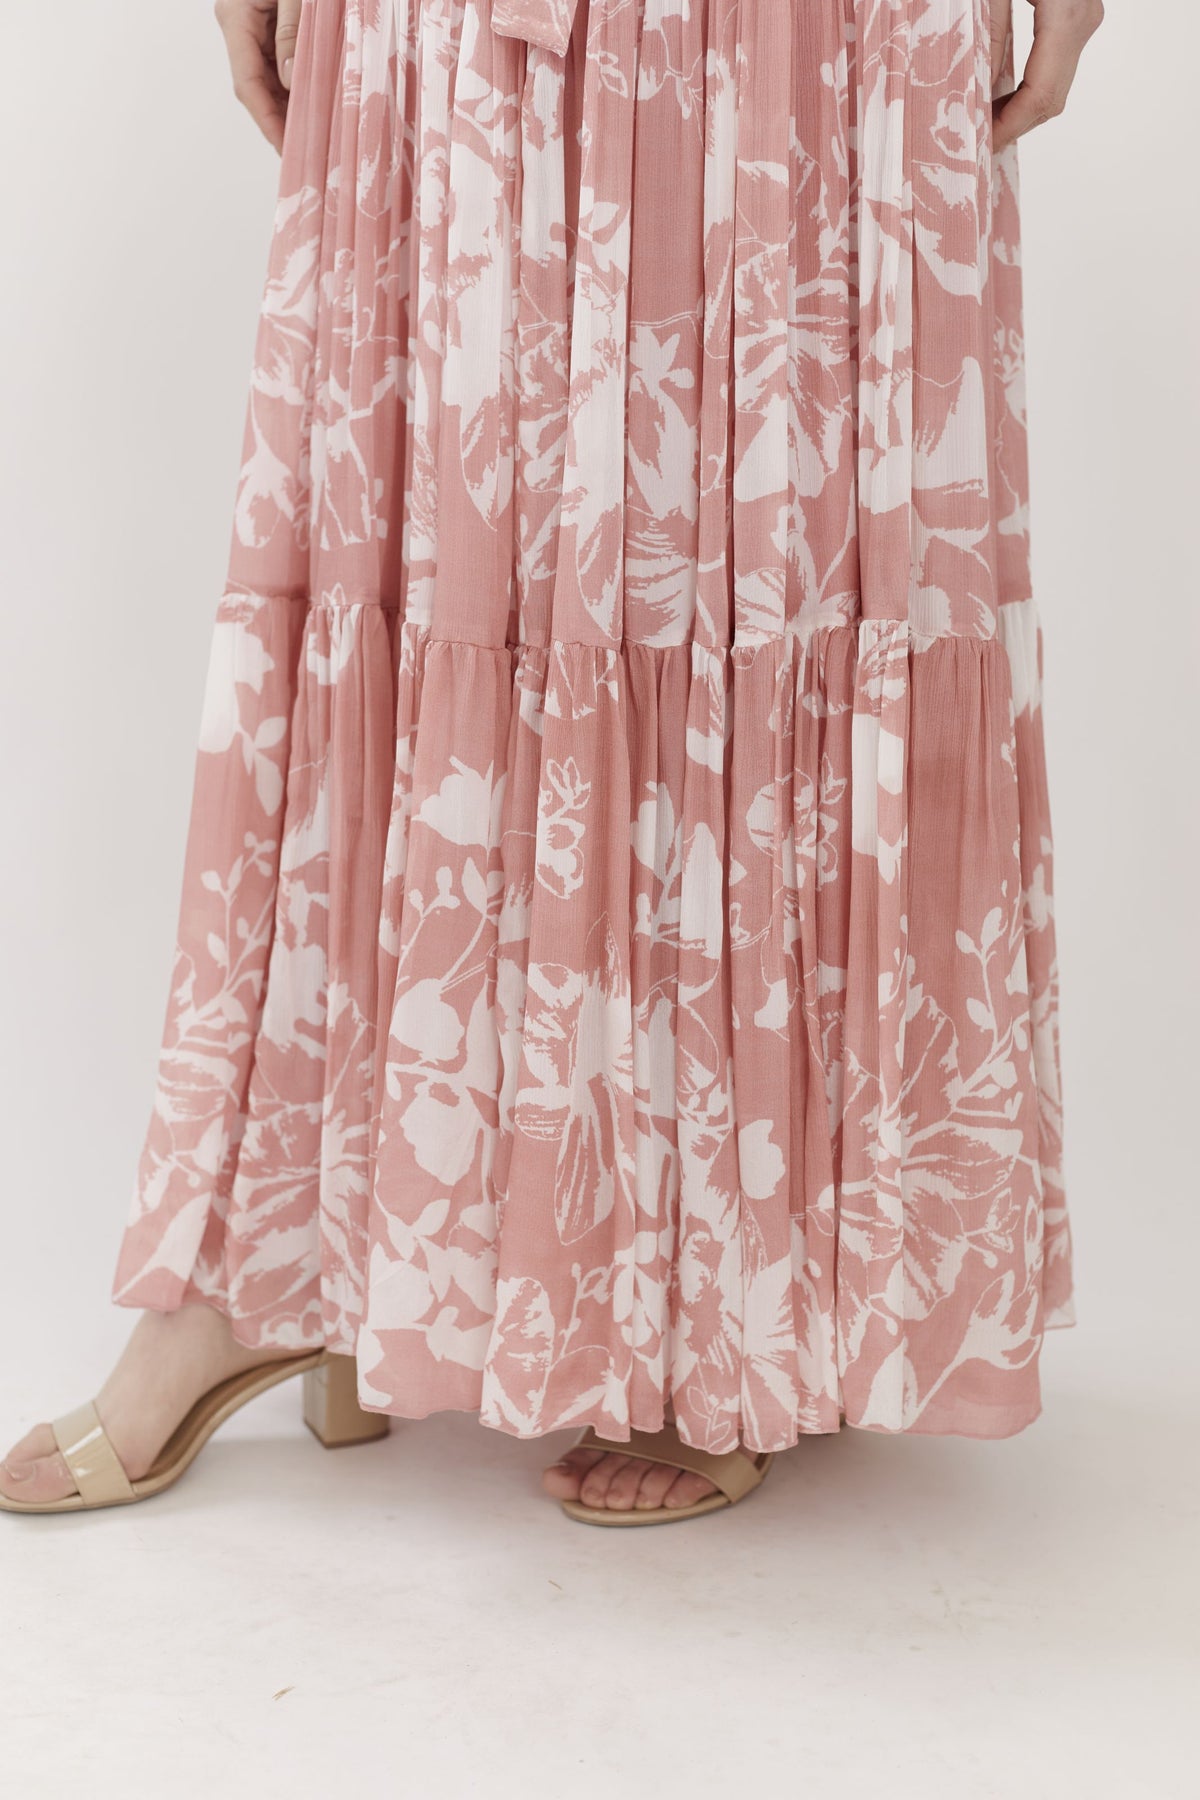 PINK AND WHITE FLORAL FLARED SKIRT